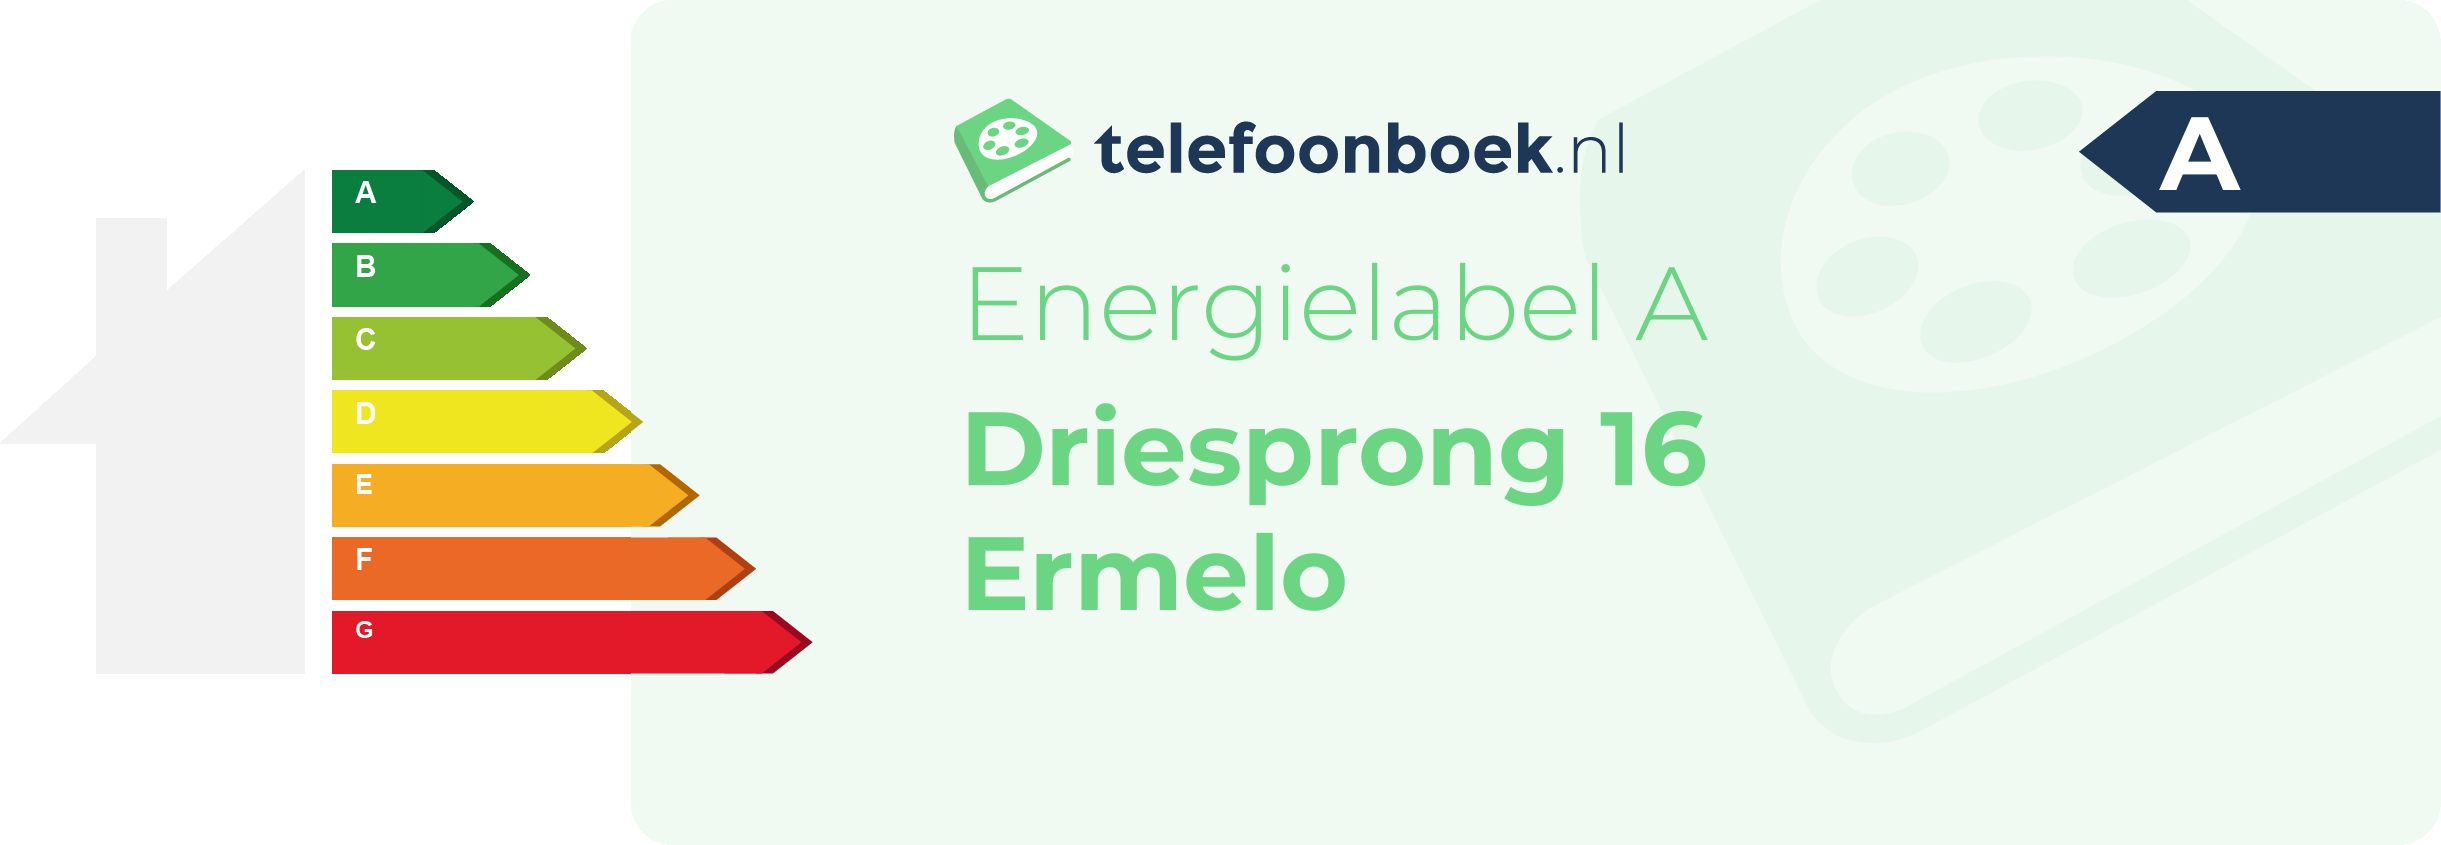 Energielabel Driesprong 16 Ermelo